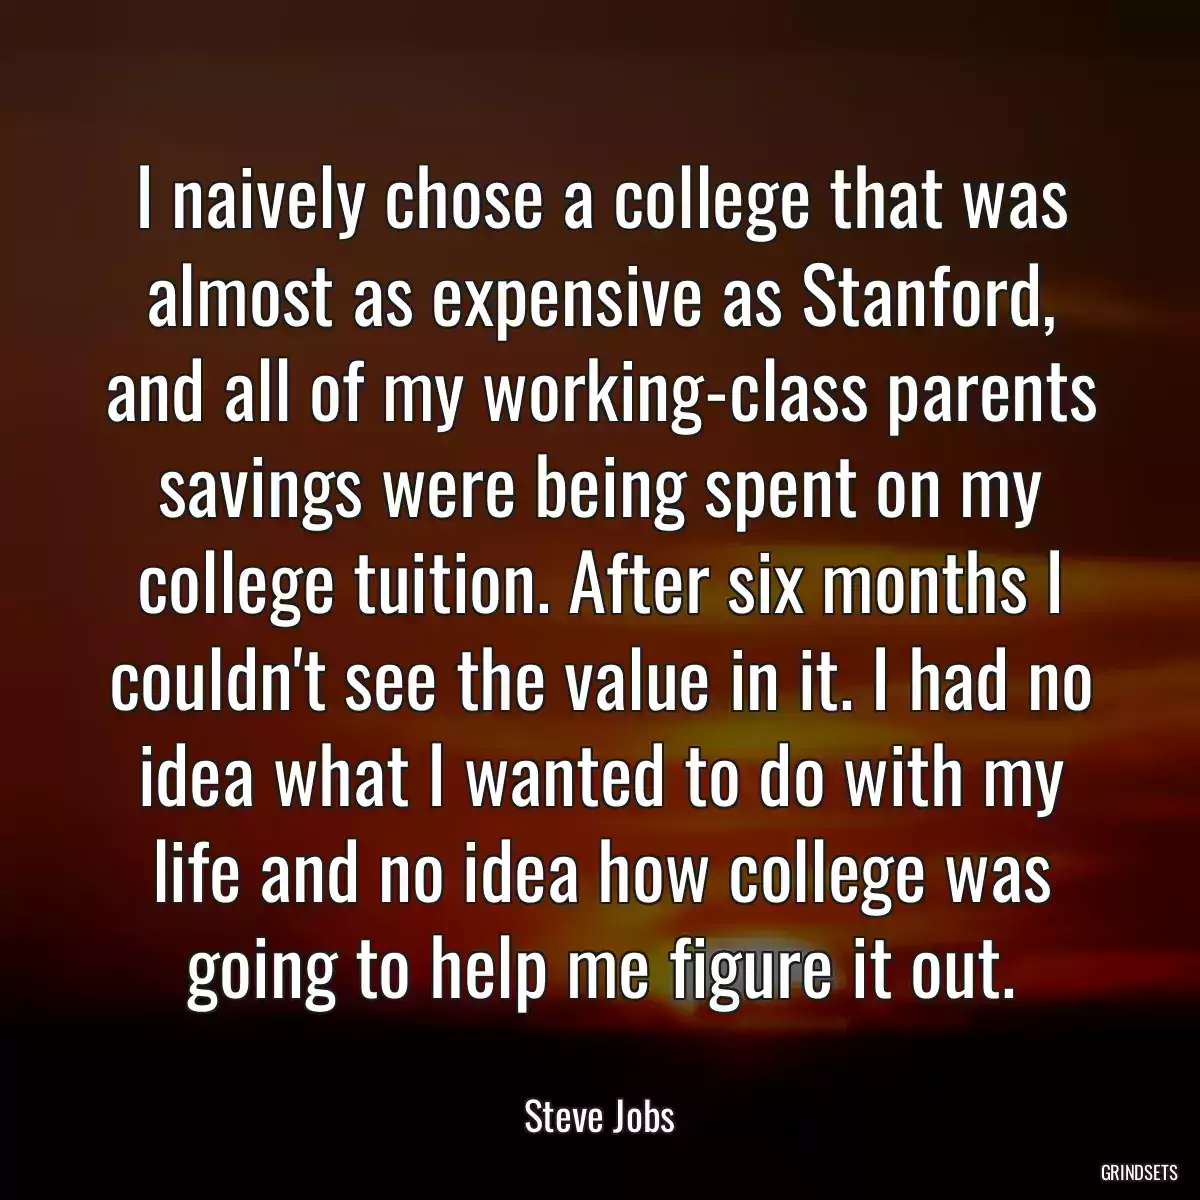 I naively chose a college that was almost as expensive as Stanford, and all of my working-class parents savings were being spent on my college tuition. After six months I couldn\'t see the value in it. I had no idea what I wanted to do with my life and no idea how college was going to help me figure it out.